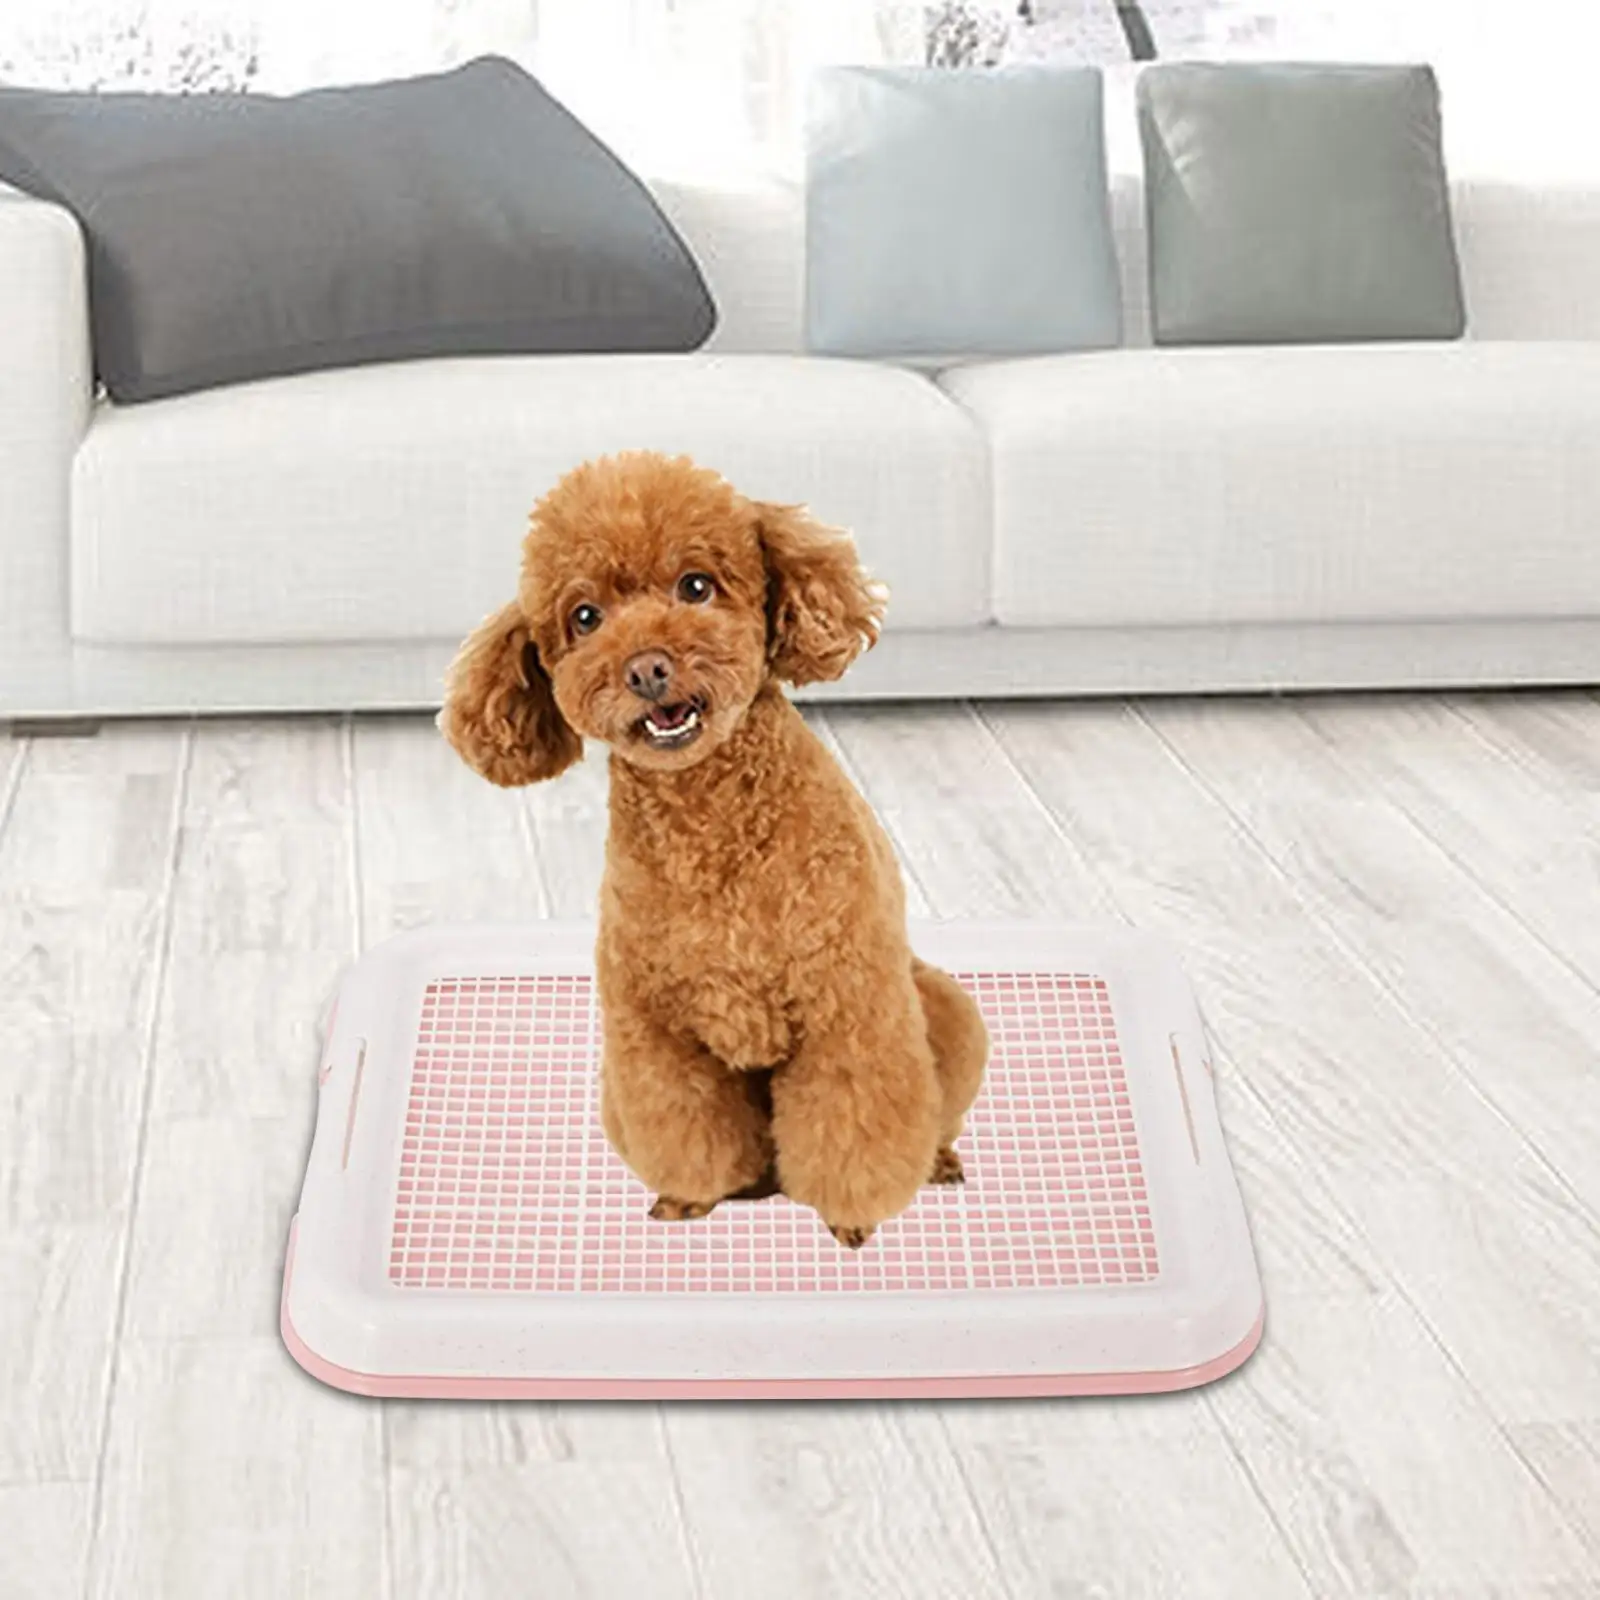 Dog Potty Toilet Training Tray Indoor Outdoor Removable Easy to Clean Anti Slip Dog Potty Tray Toilet for Puppies Small Dogs